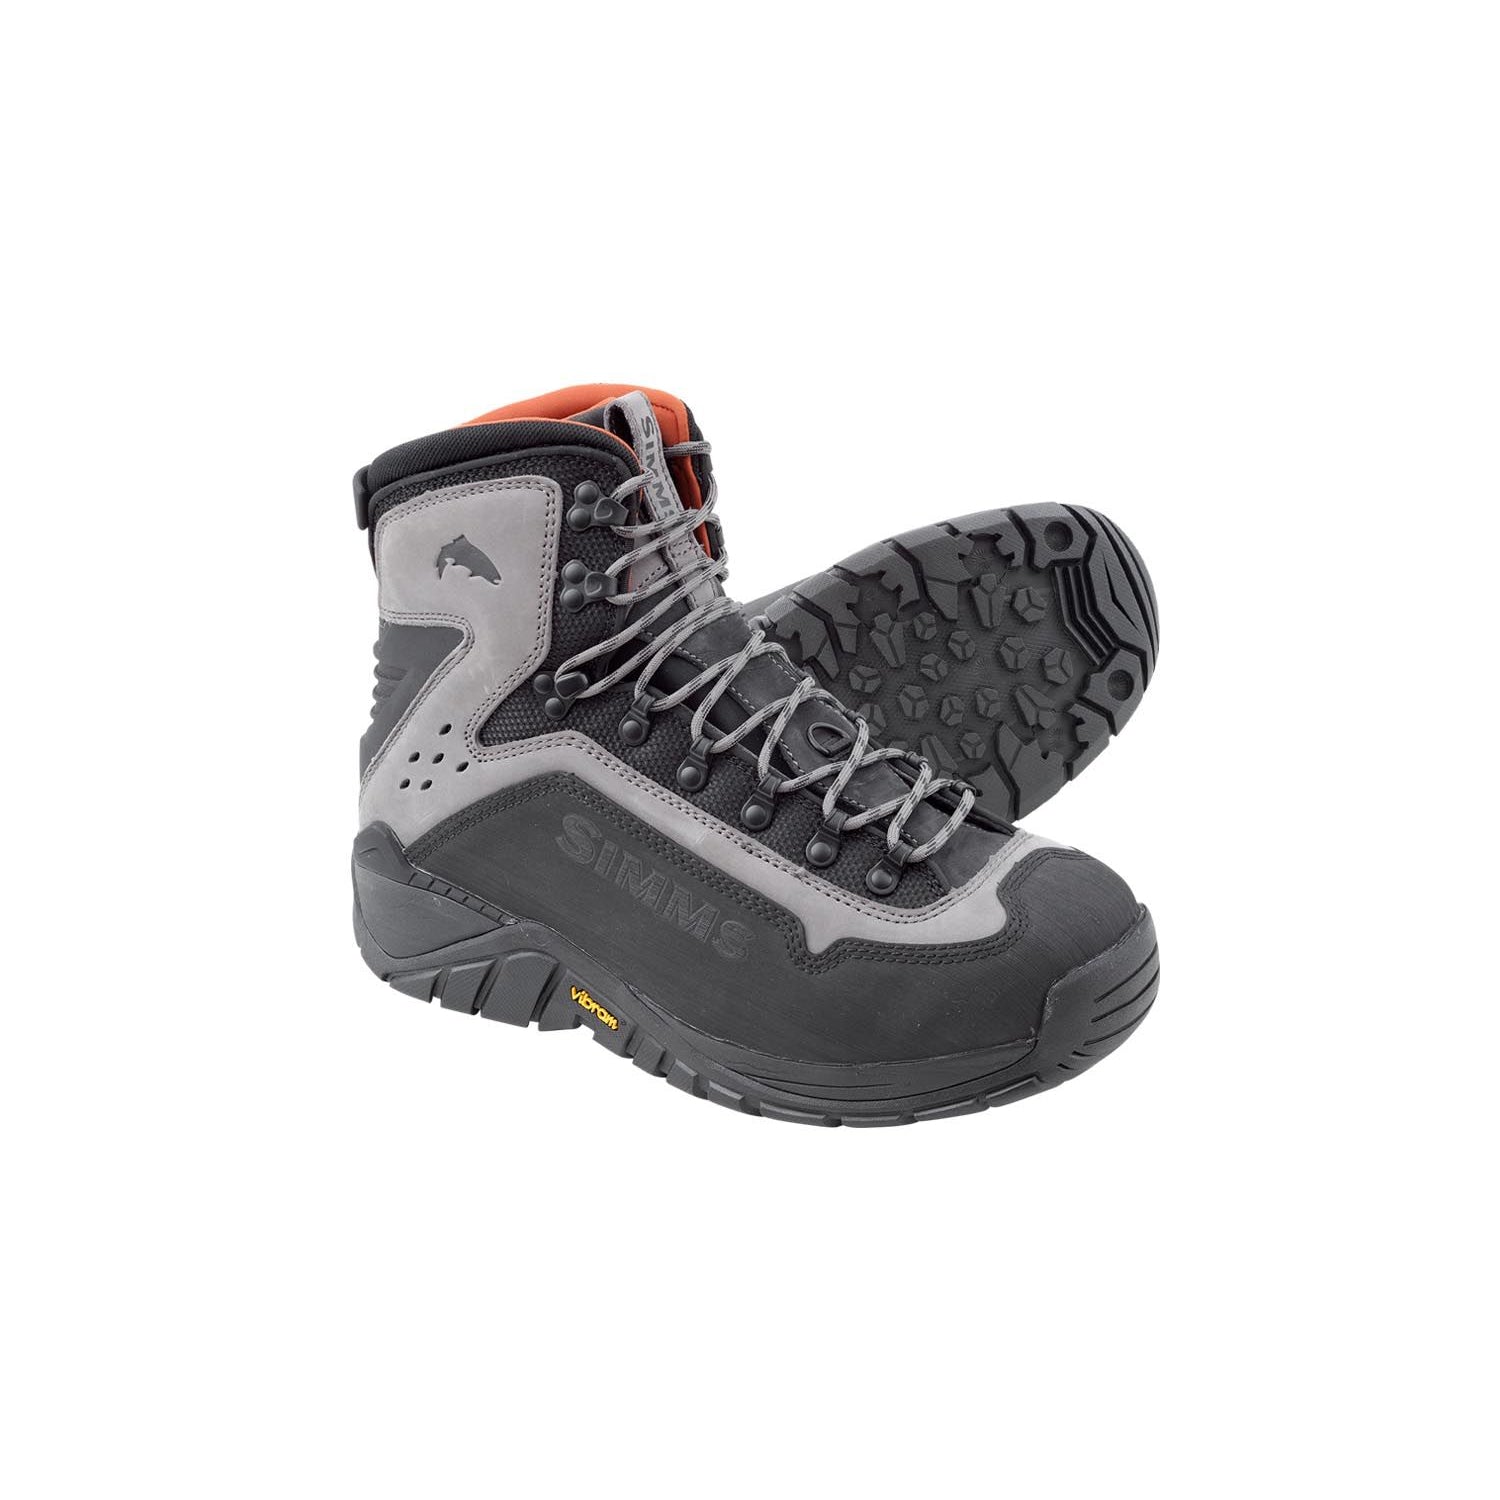 Simms Fishing G3 Guide Boots From ultralight wading boots id